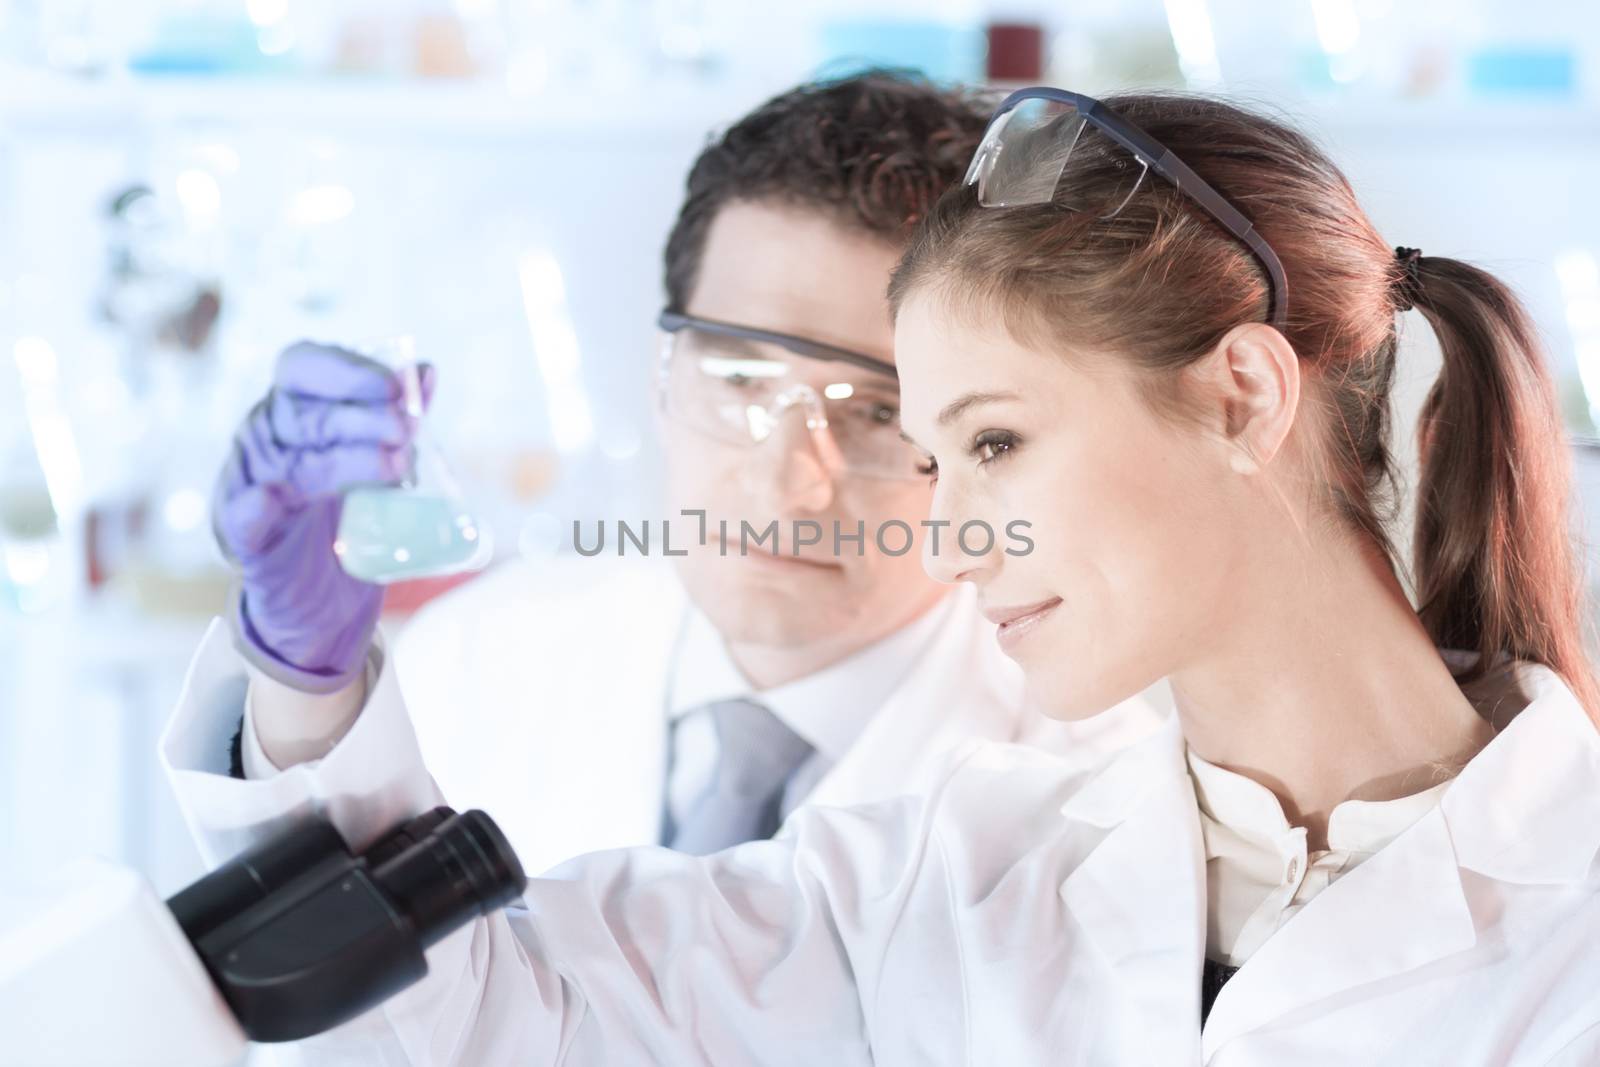 Life scientist researching in laboratory. Attractive young scientist and her post doctoral supervisor looking at the microscope slide in the forensic laboratory. Healthcare and biotechnology.